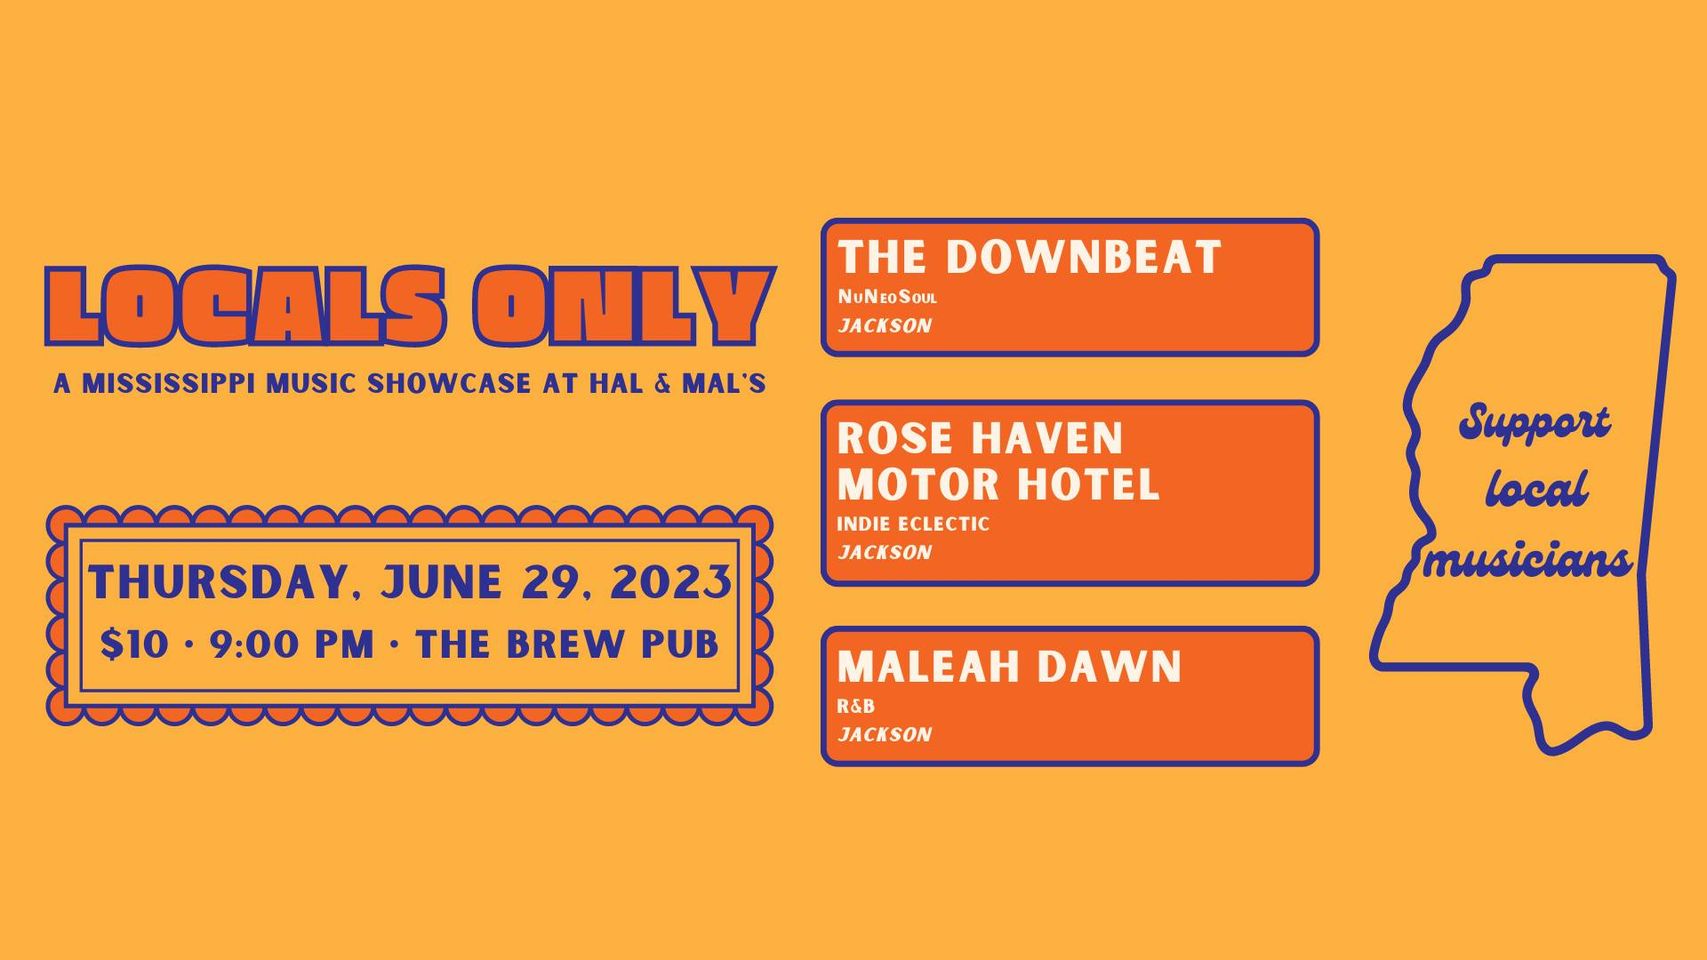 Locals Only with The Downbeat, Rose Haven Motor Hotel, + Maleah Dawn